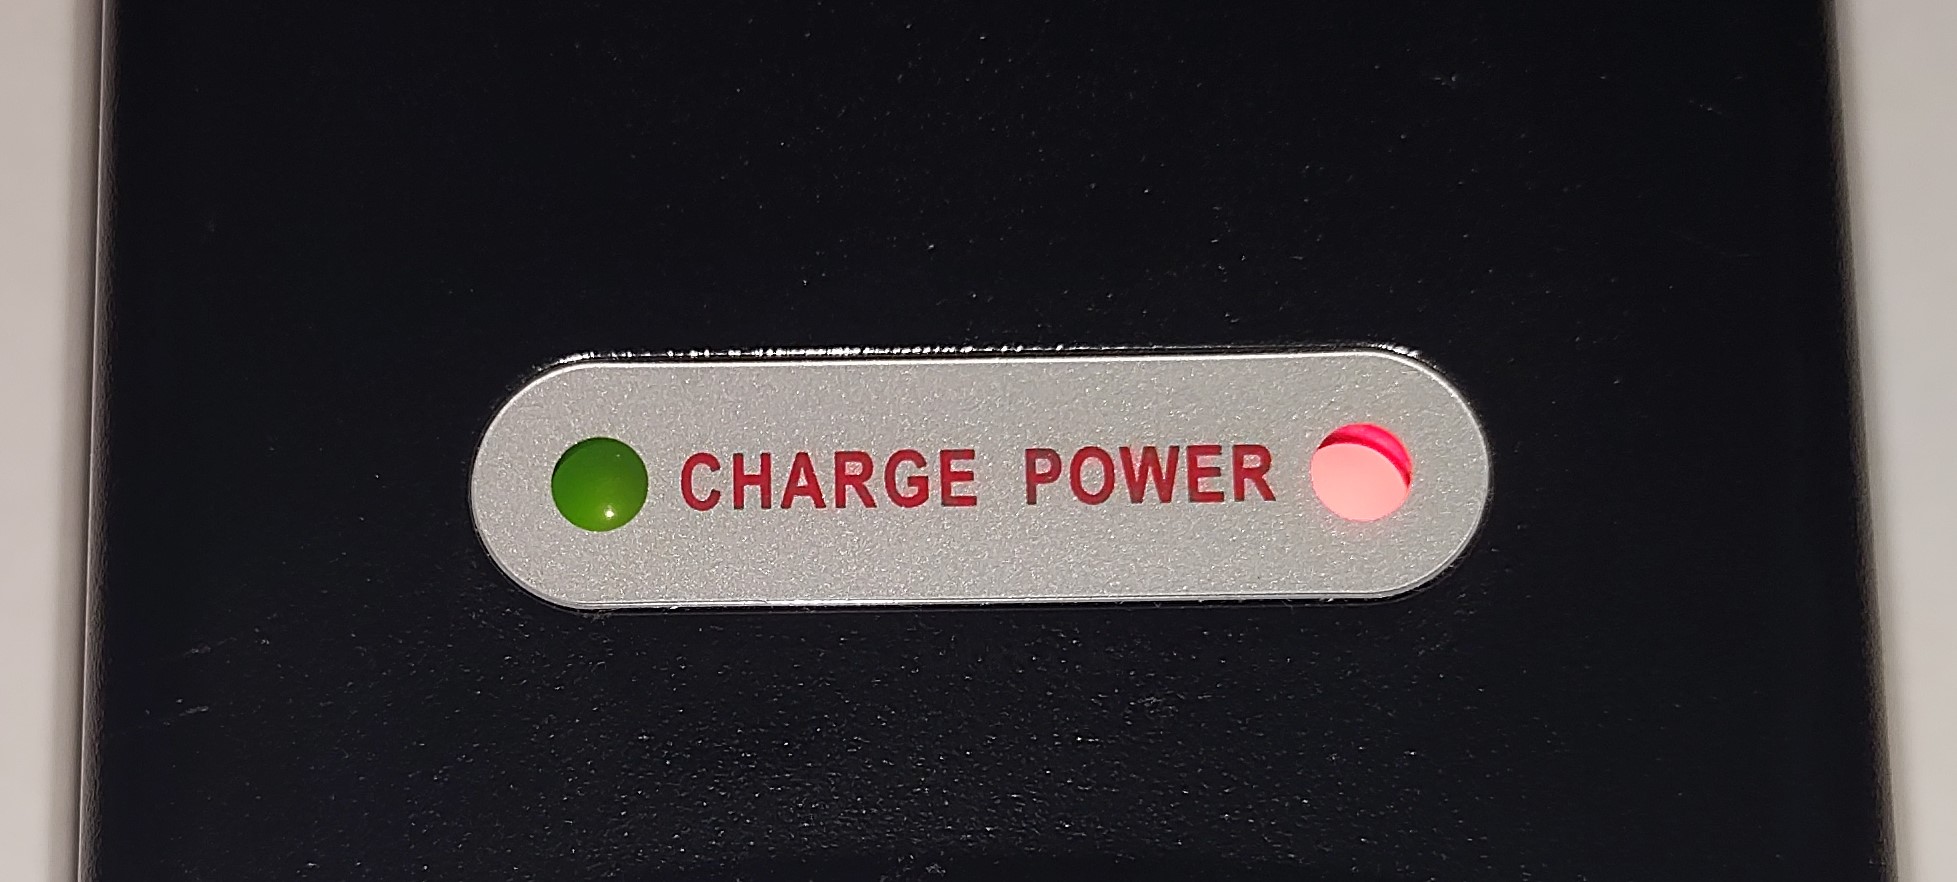 Rad charger with two indicator lights, one light is red and the other light has turned green